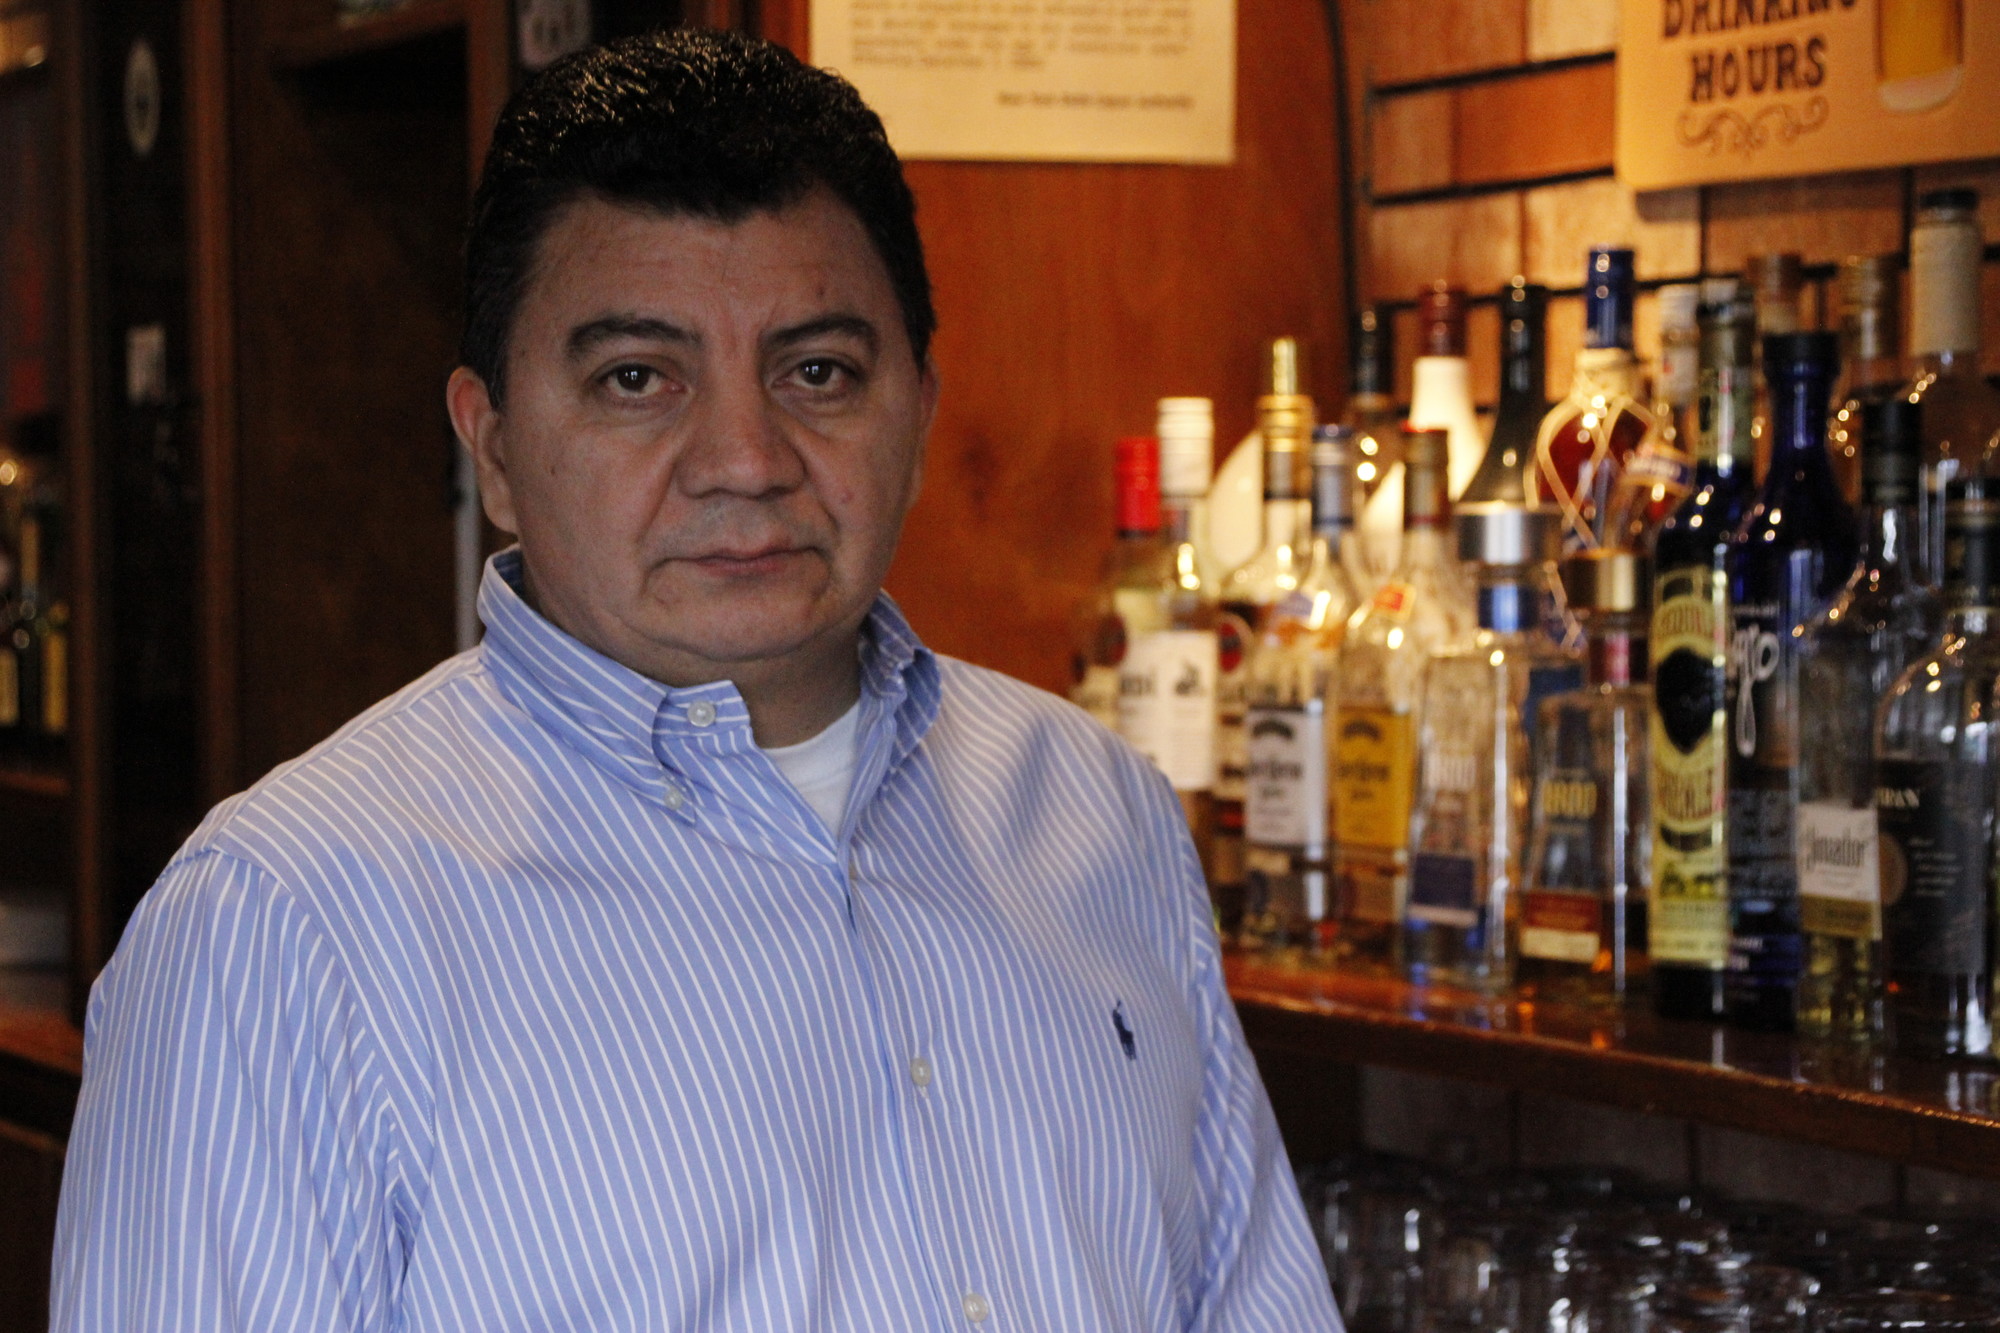 Santos Gutierrez opened La Perla in 2008 to create a space for people from different backgrounds to congregate and enjoy El Salvadoran food.